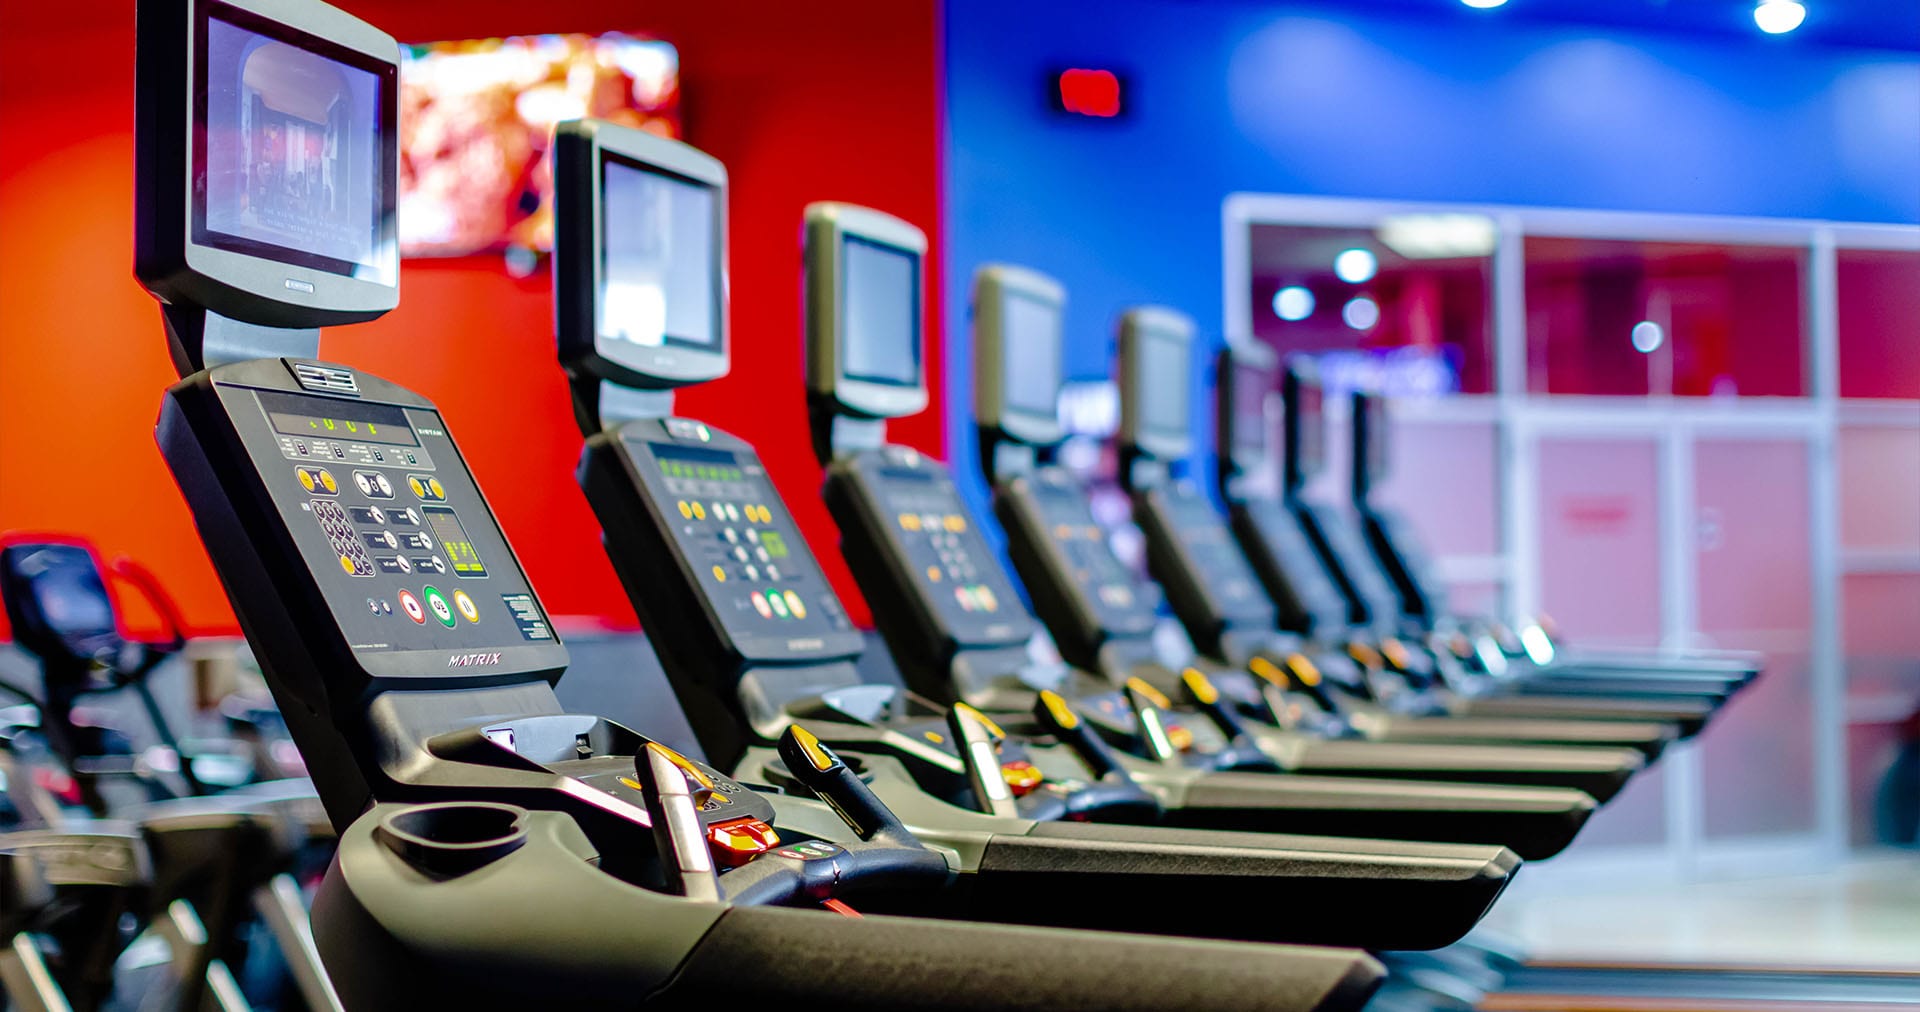 rows of treadmills for weight loss solutions